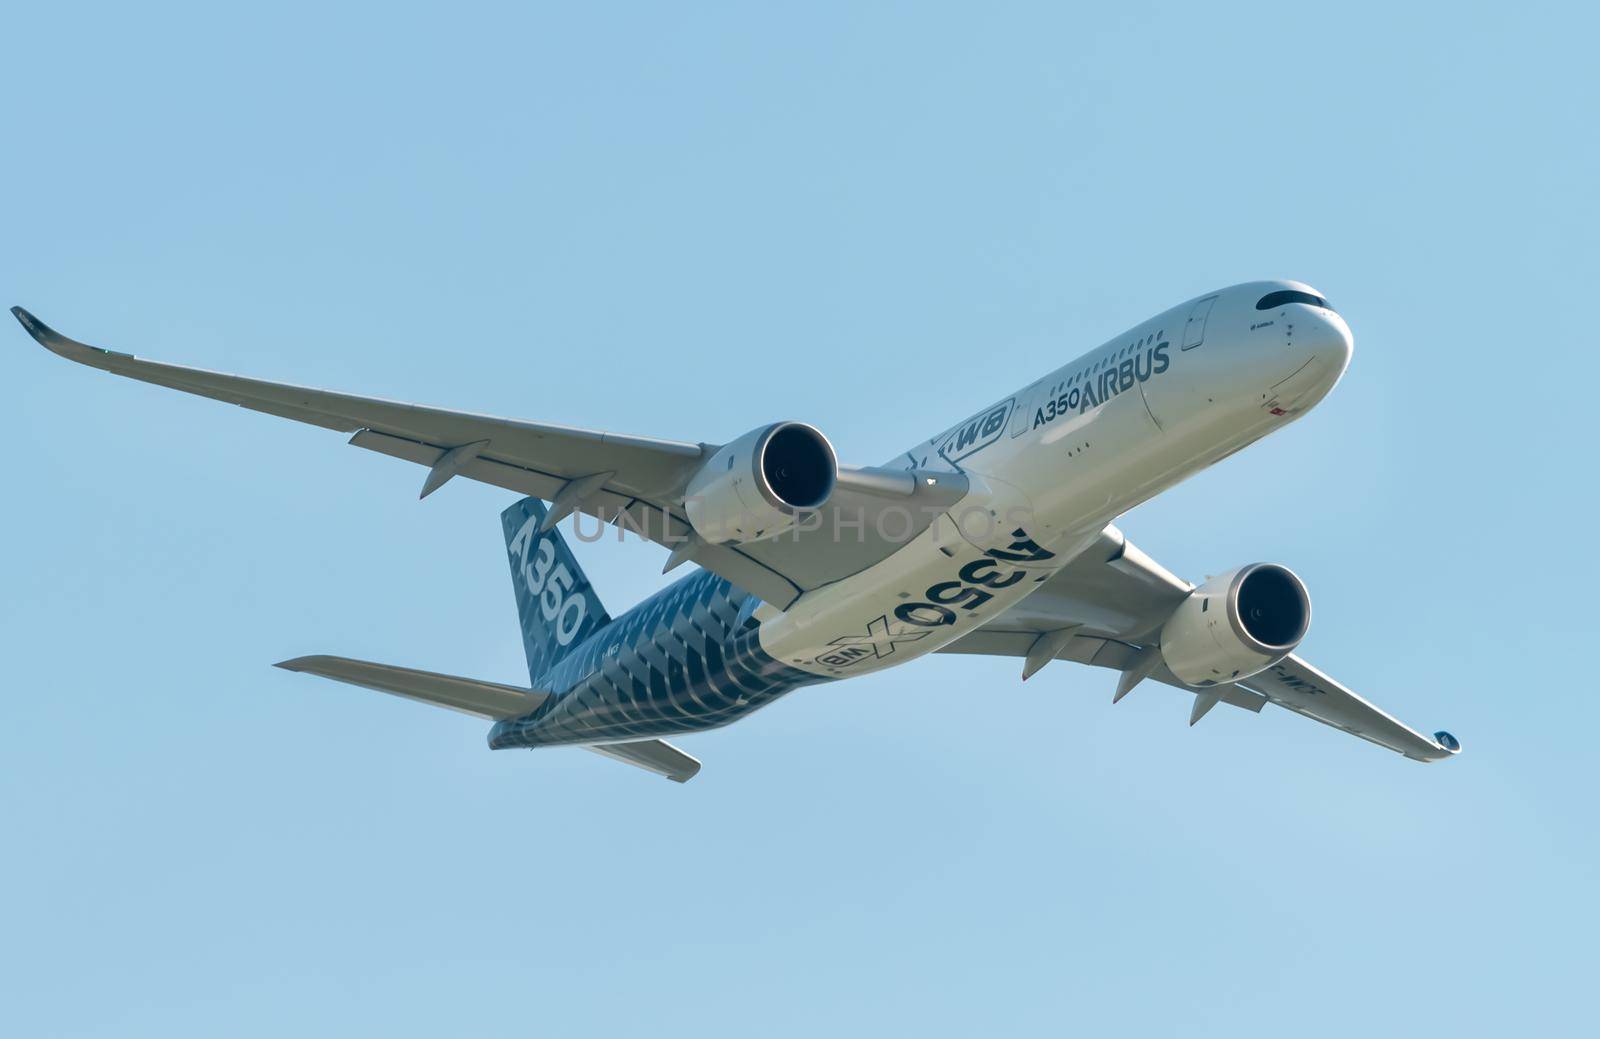 August 30, 2019. Zhukovsky, Russia. long-range wide-body twin-engine passenger aircraft Airbus A350-900 XWB Airbus Industrie.